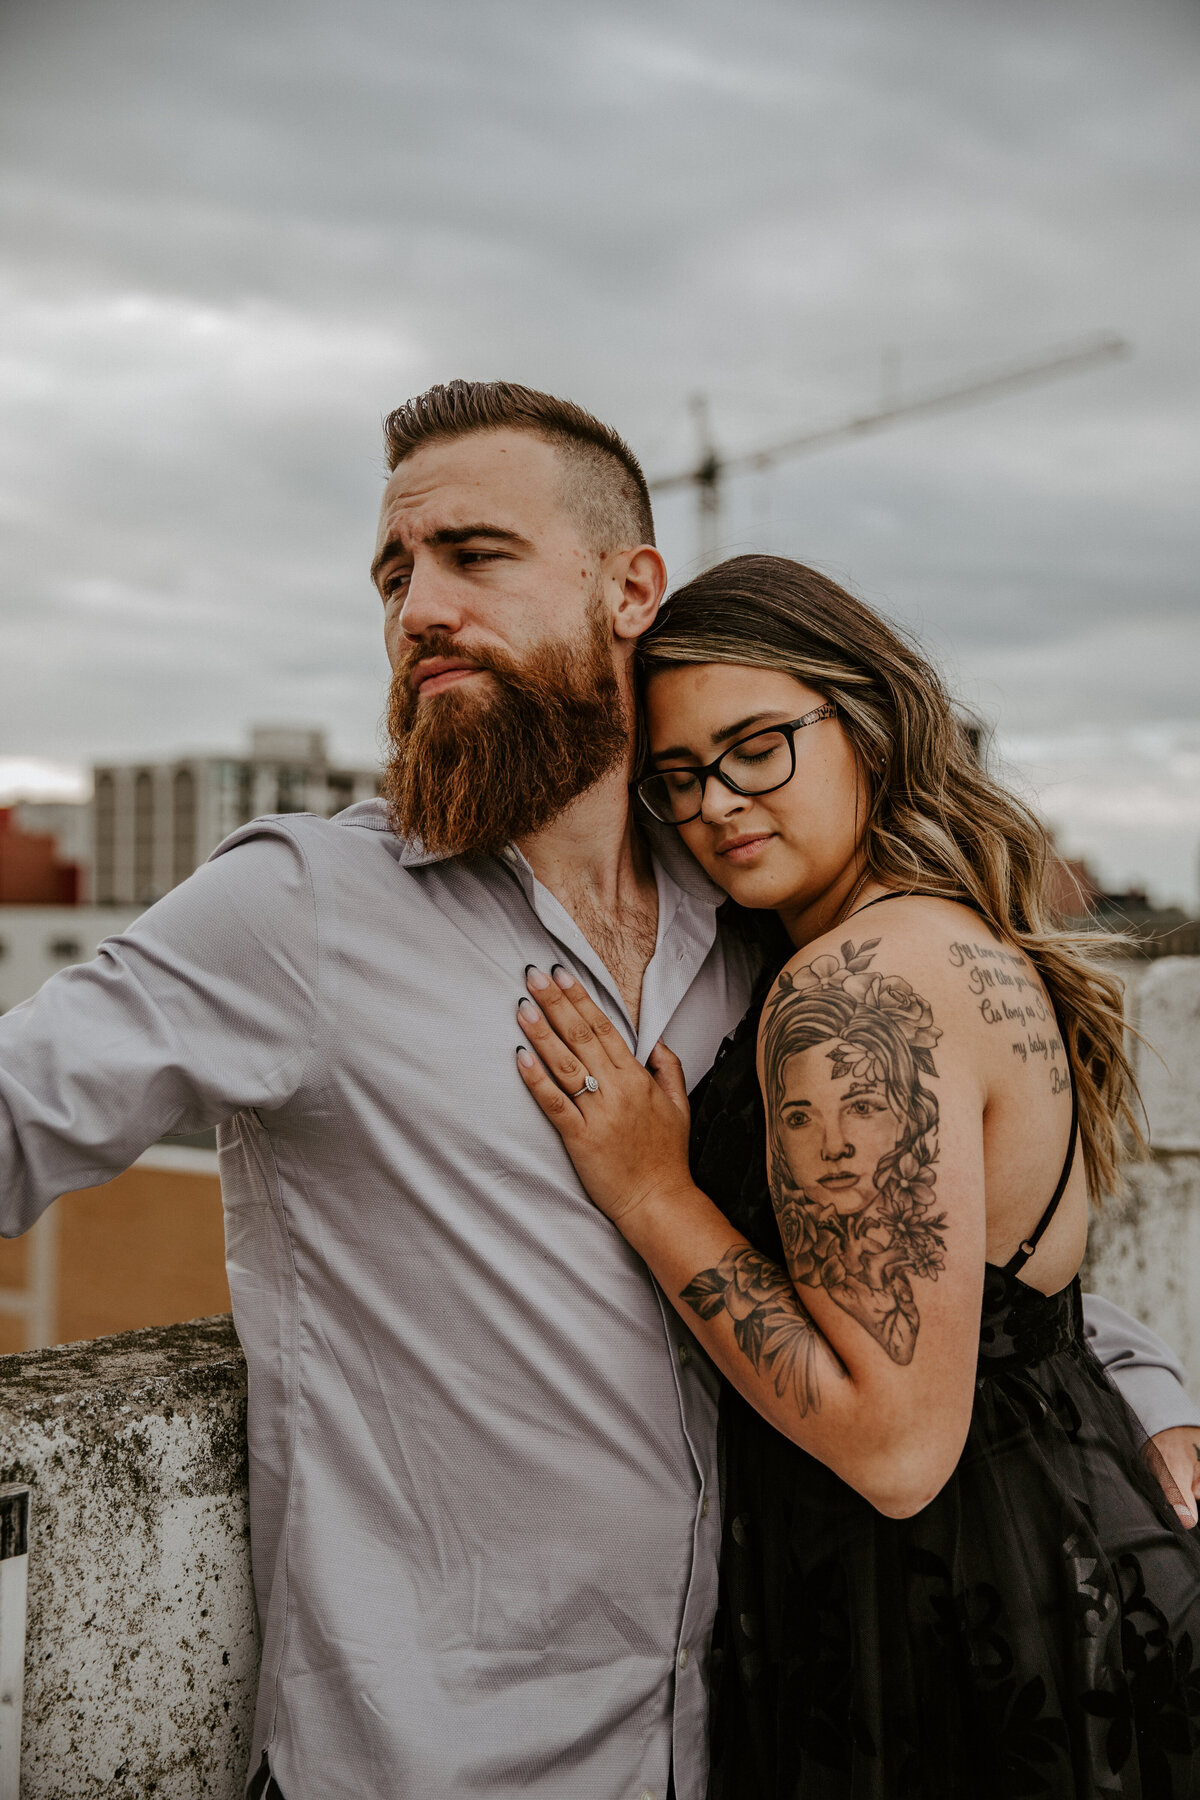 Downtown London, ON rooftop parking garage engagement photos. Man is casually leaning against the rooftop half-wall looking off in the distance. His fiance is leaning into him, resting her head on his shoulder and hand on his chest. Her arms have black outline tattoos.